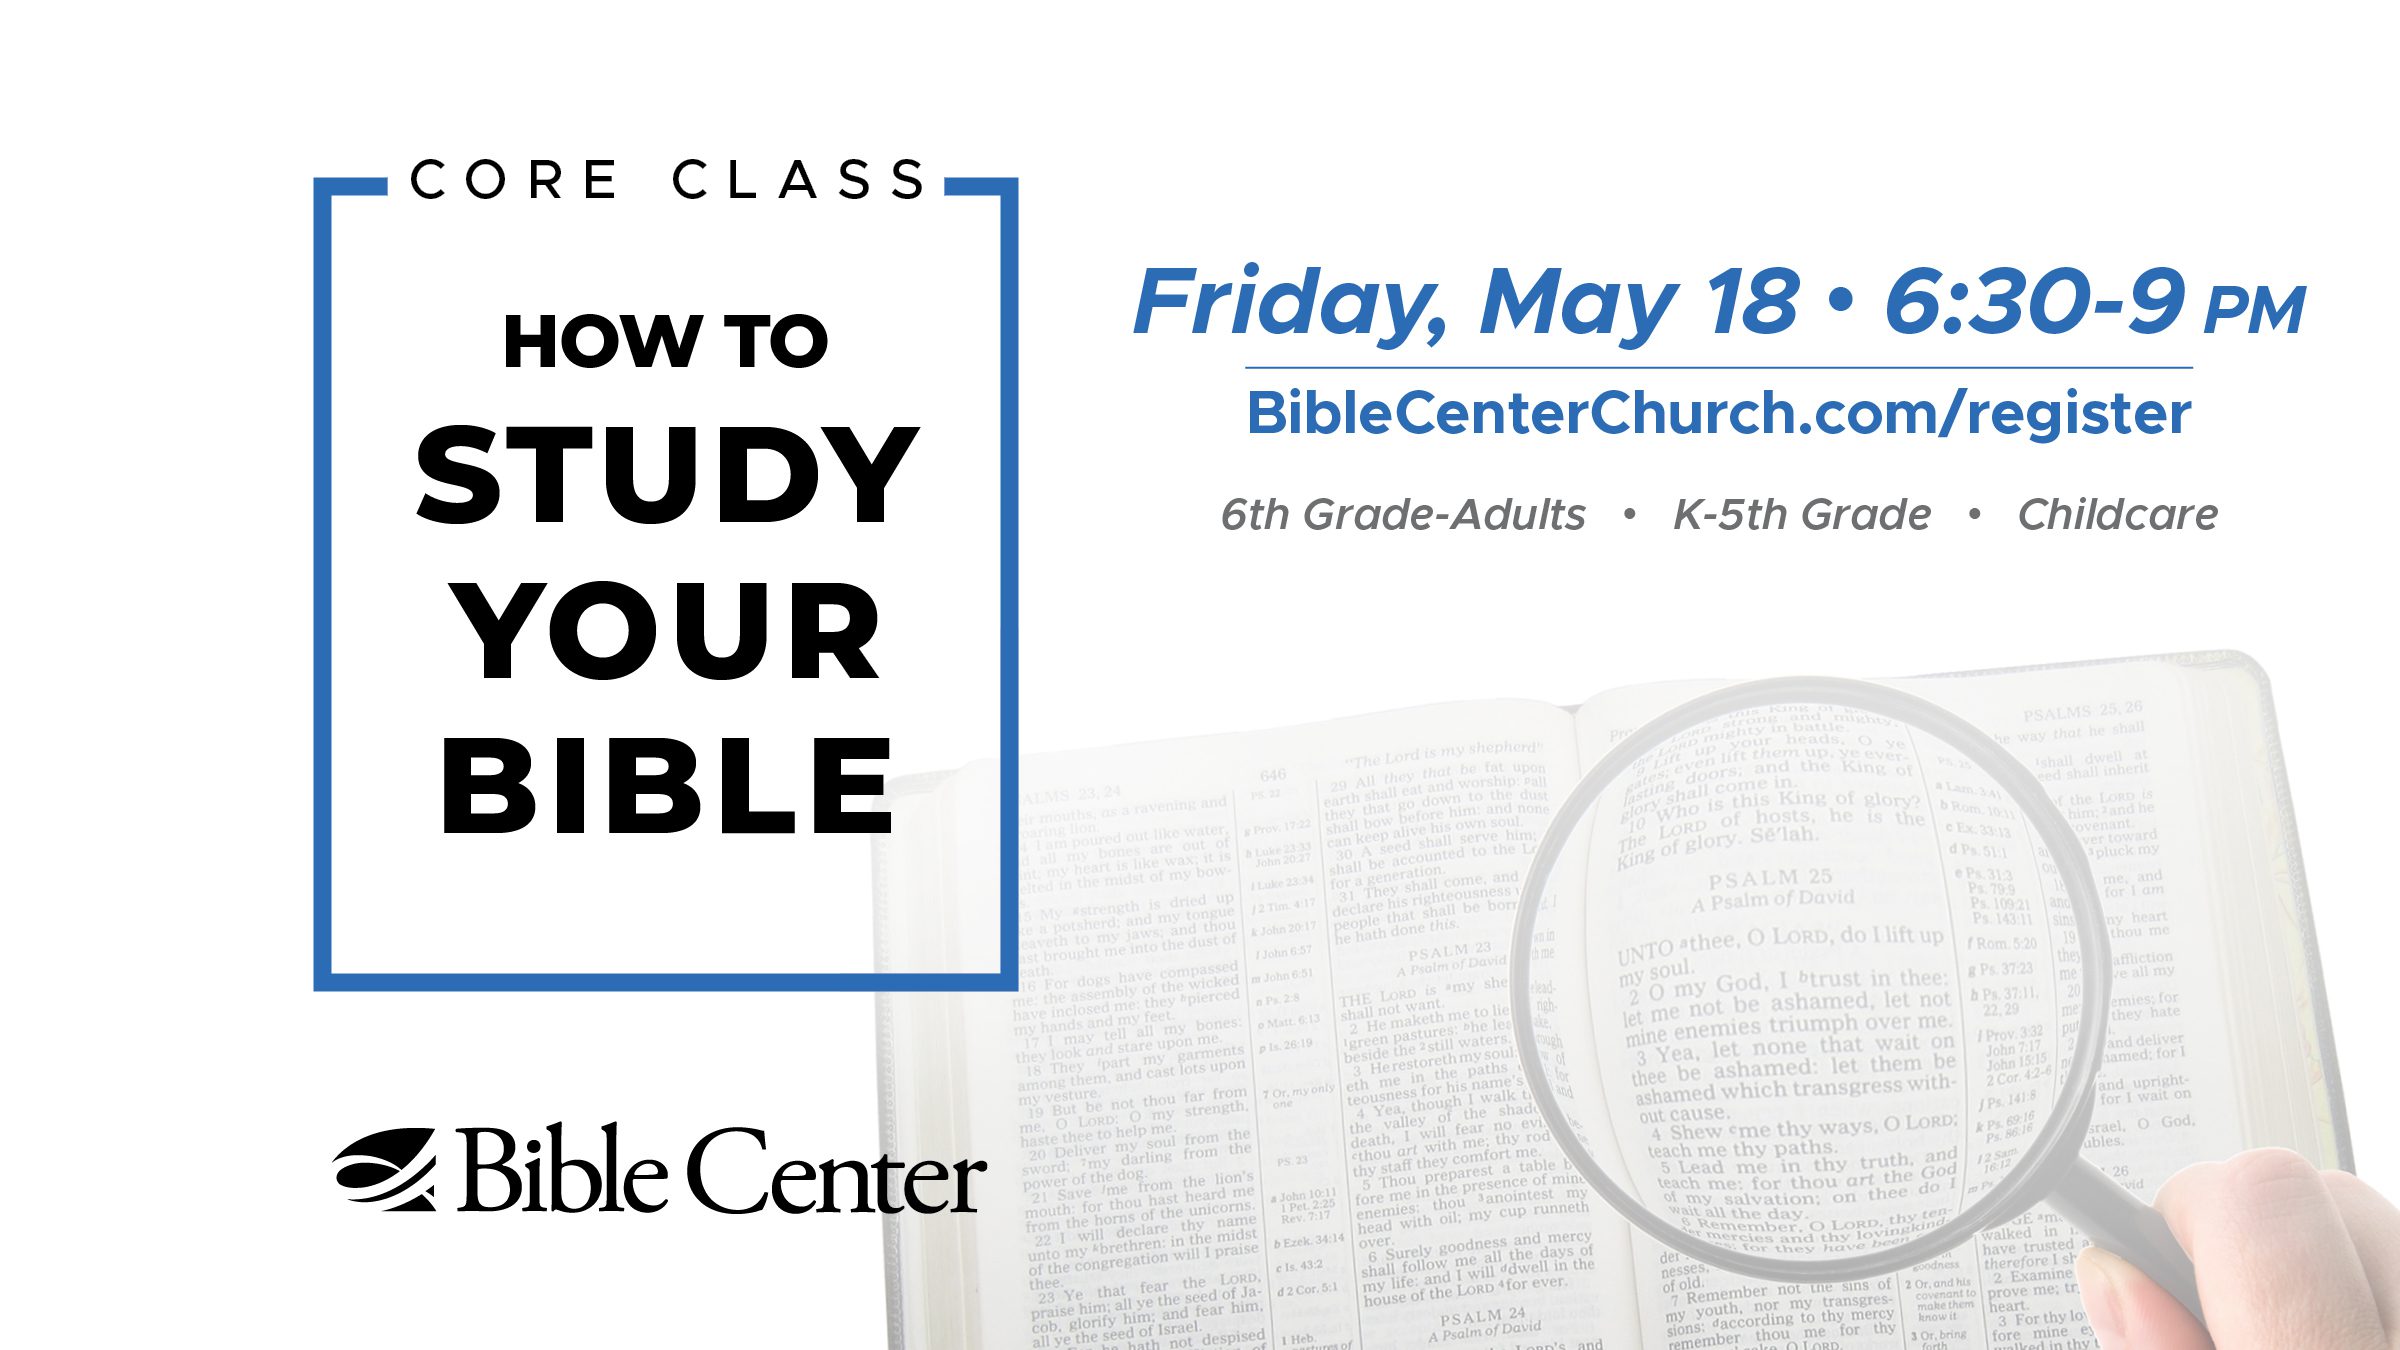 Introducing Bible Center Core Classes